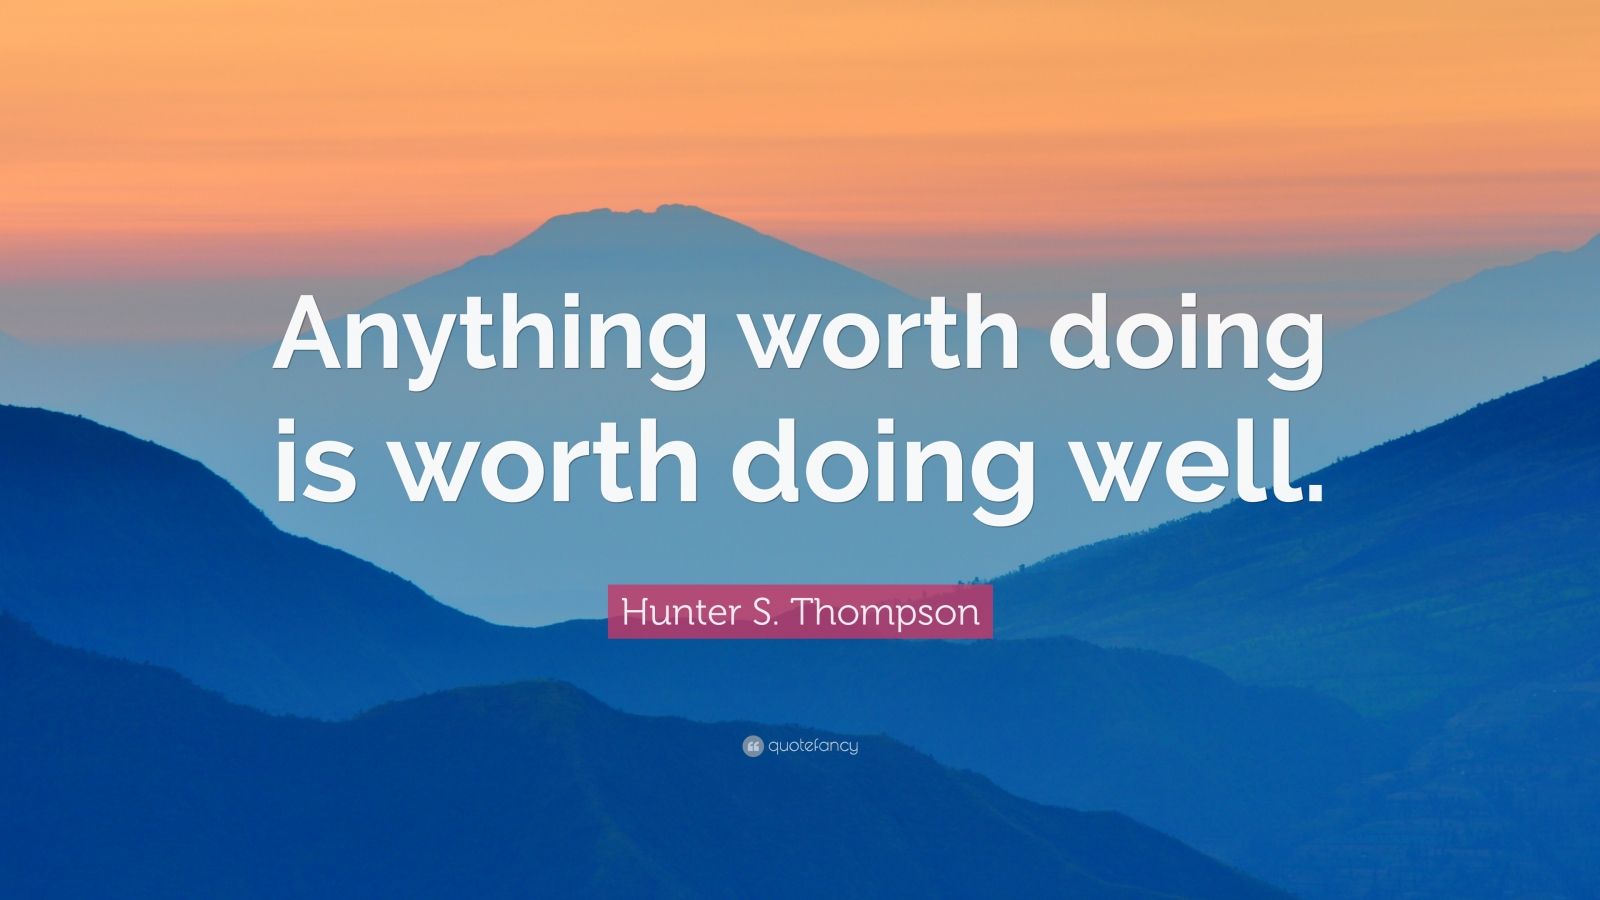 Hunter S. Thompson Quote: "Anything worth doing is worth doing well." (12 wallpapers) - Quotefancy